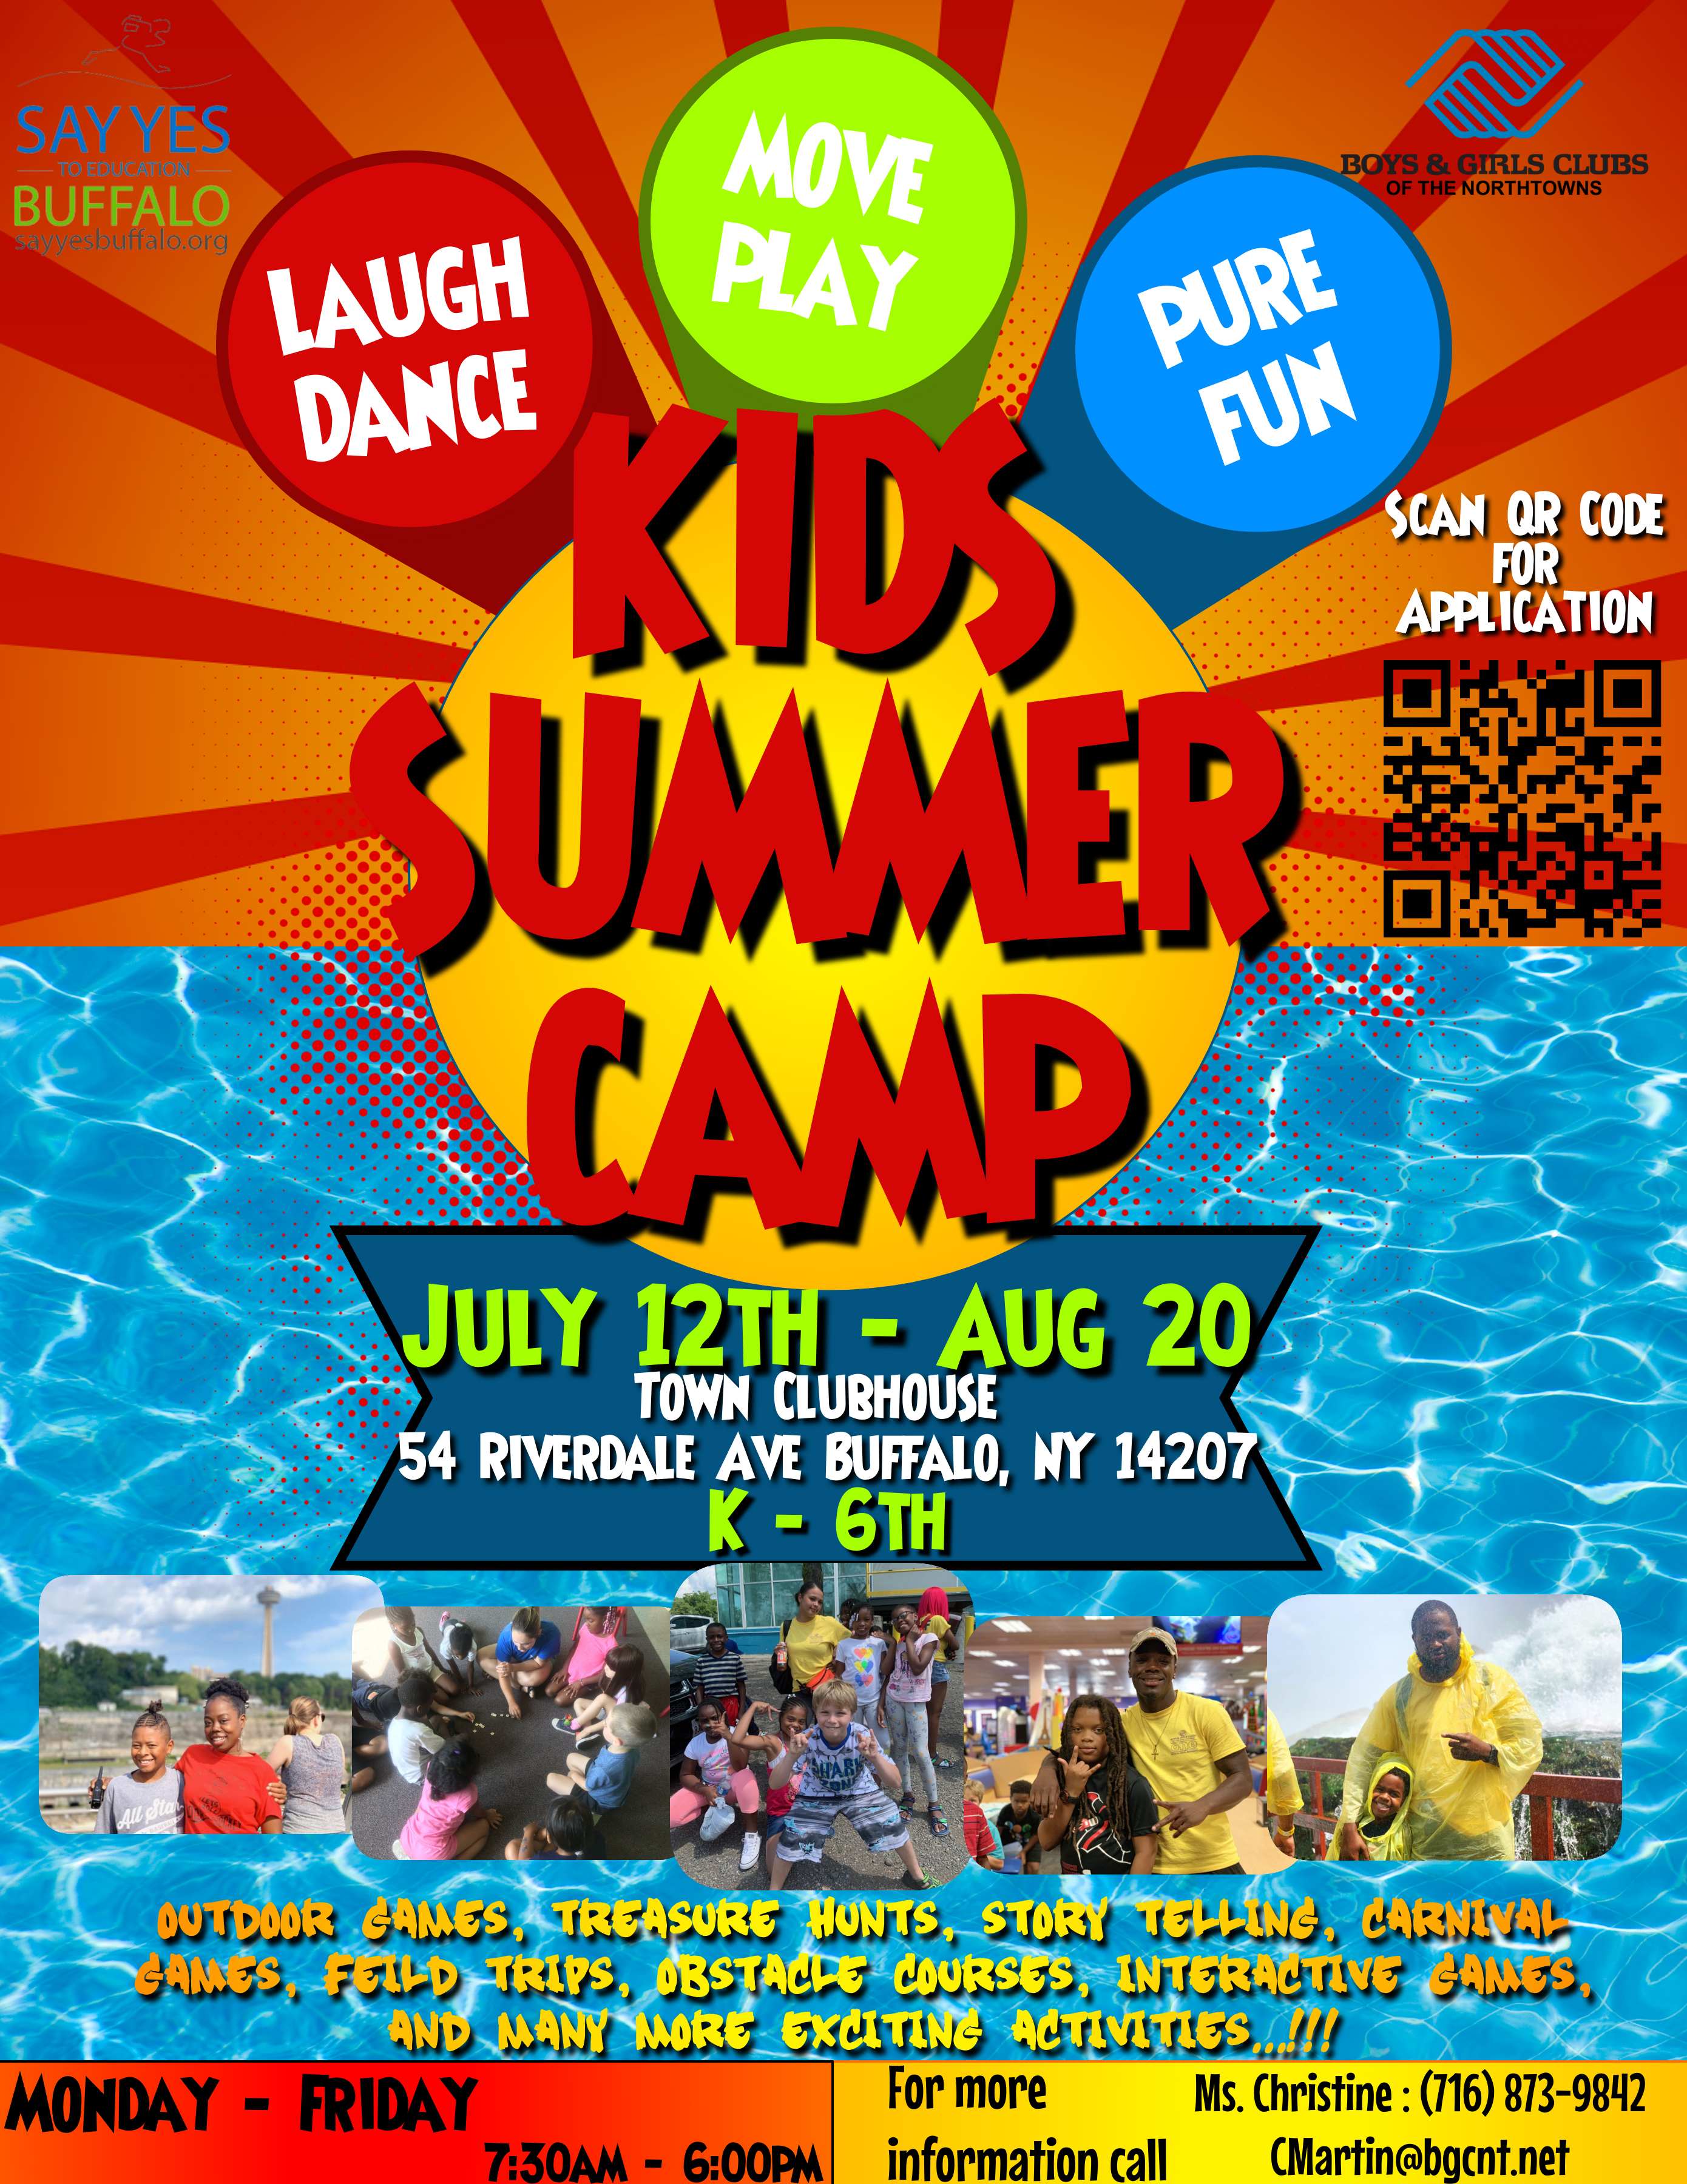 Boys and Girls Clubs of the Northtowns - Say Yes Summer Camp